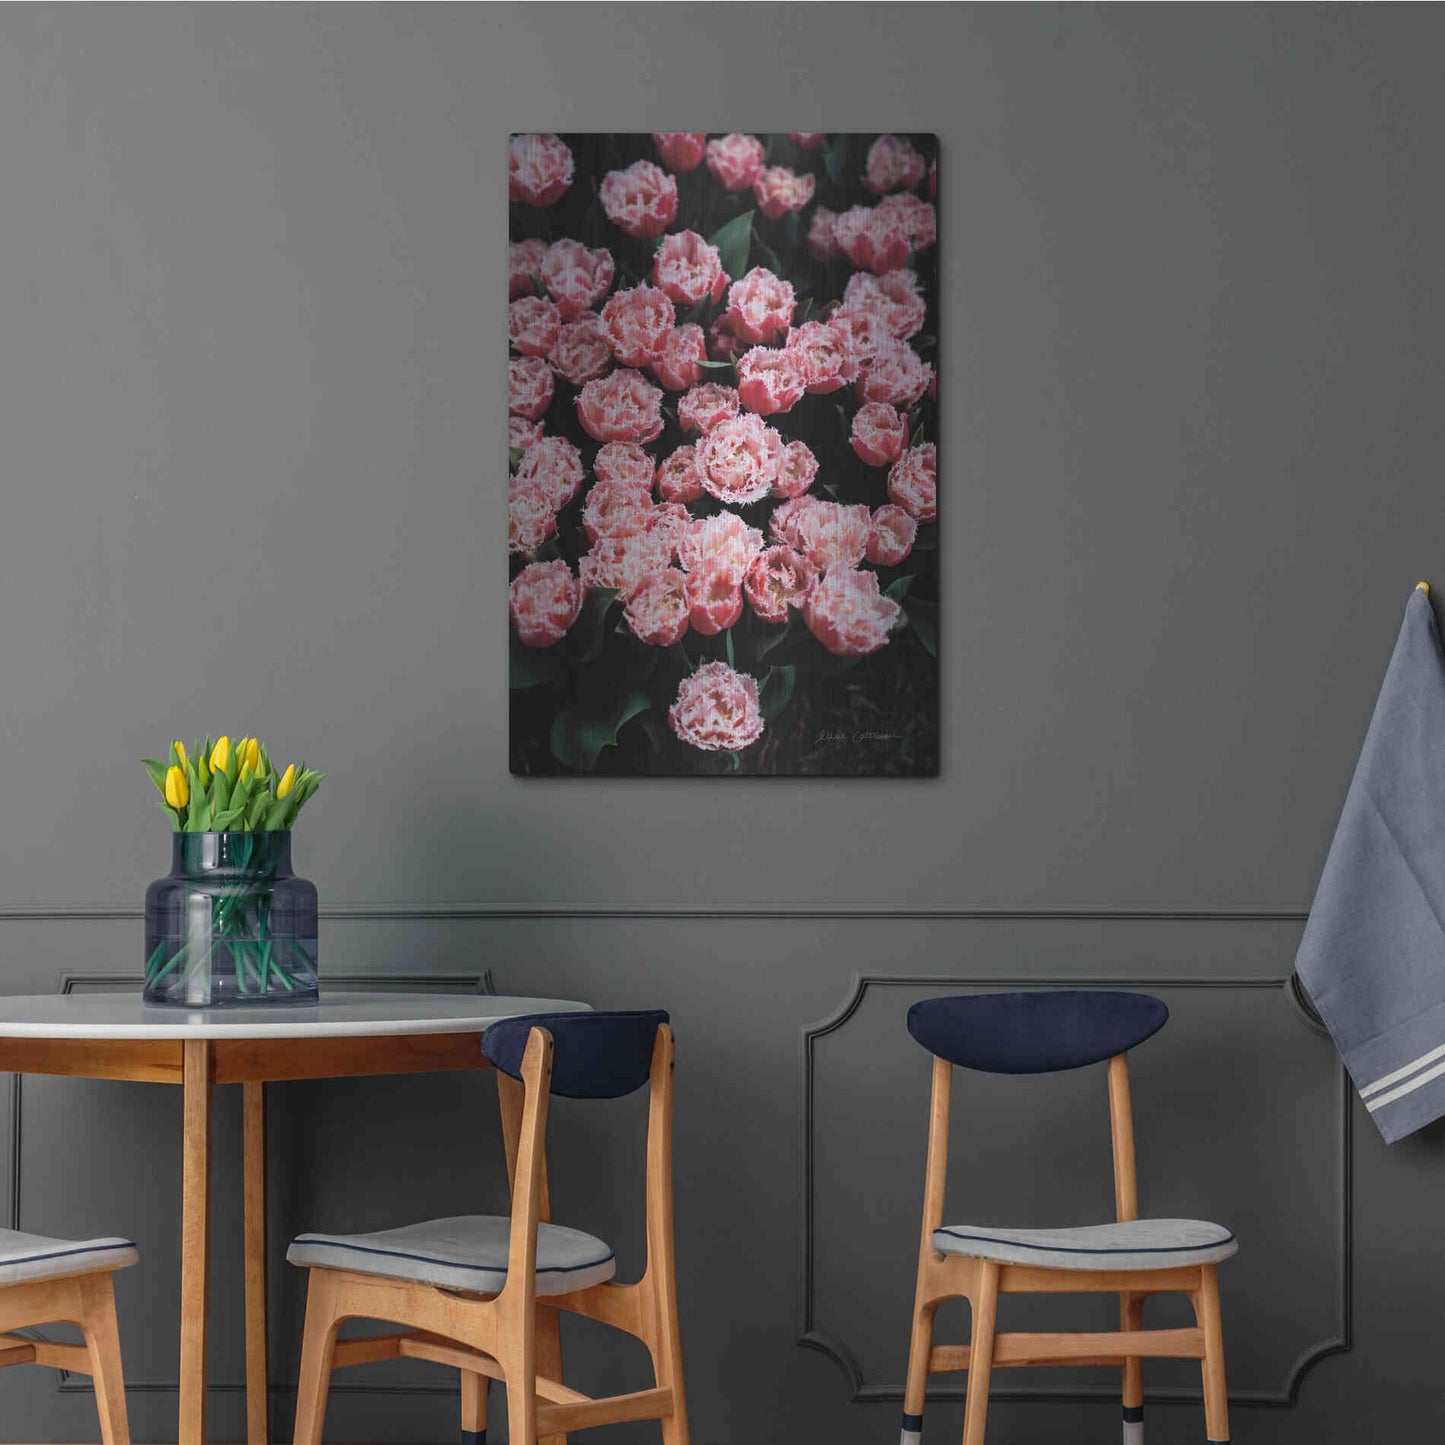 Luxe Metal Art 'Fringed Tulips' by Elise Catterall, Metal Wall Art,24x36